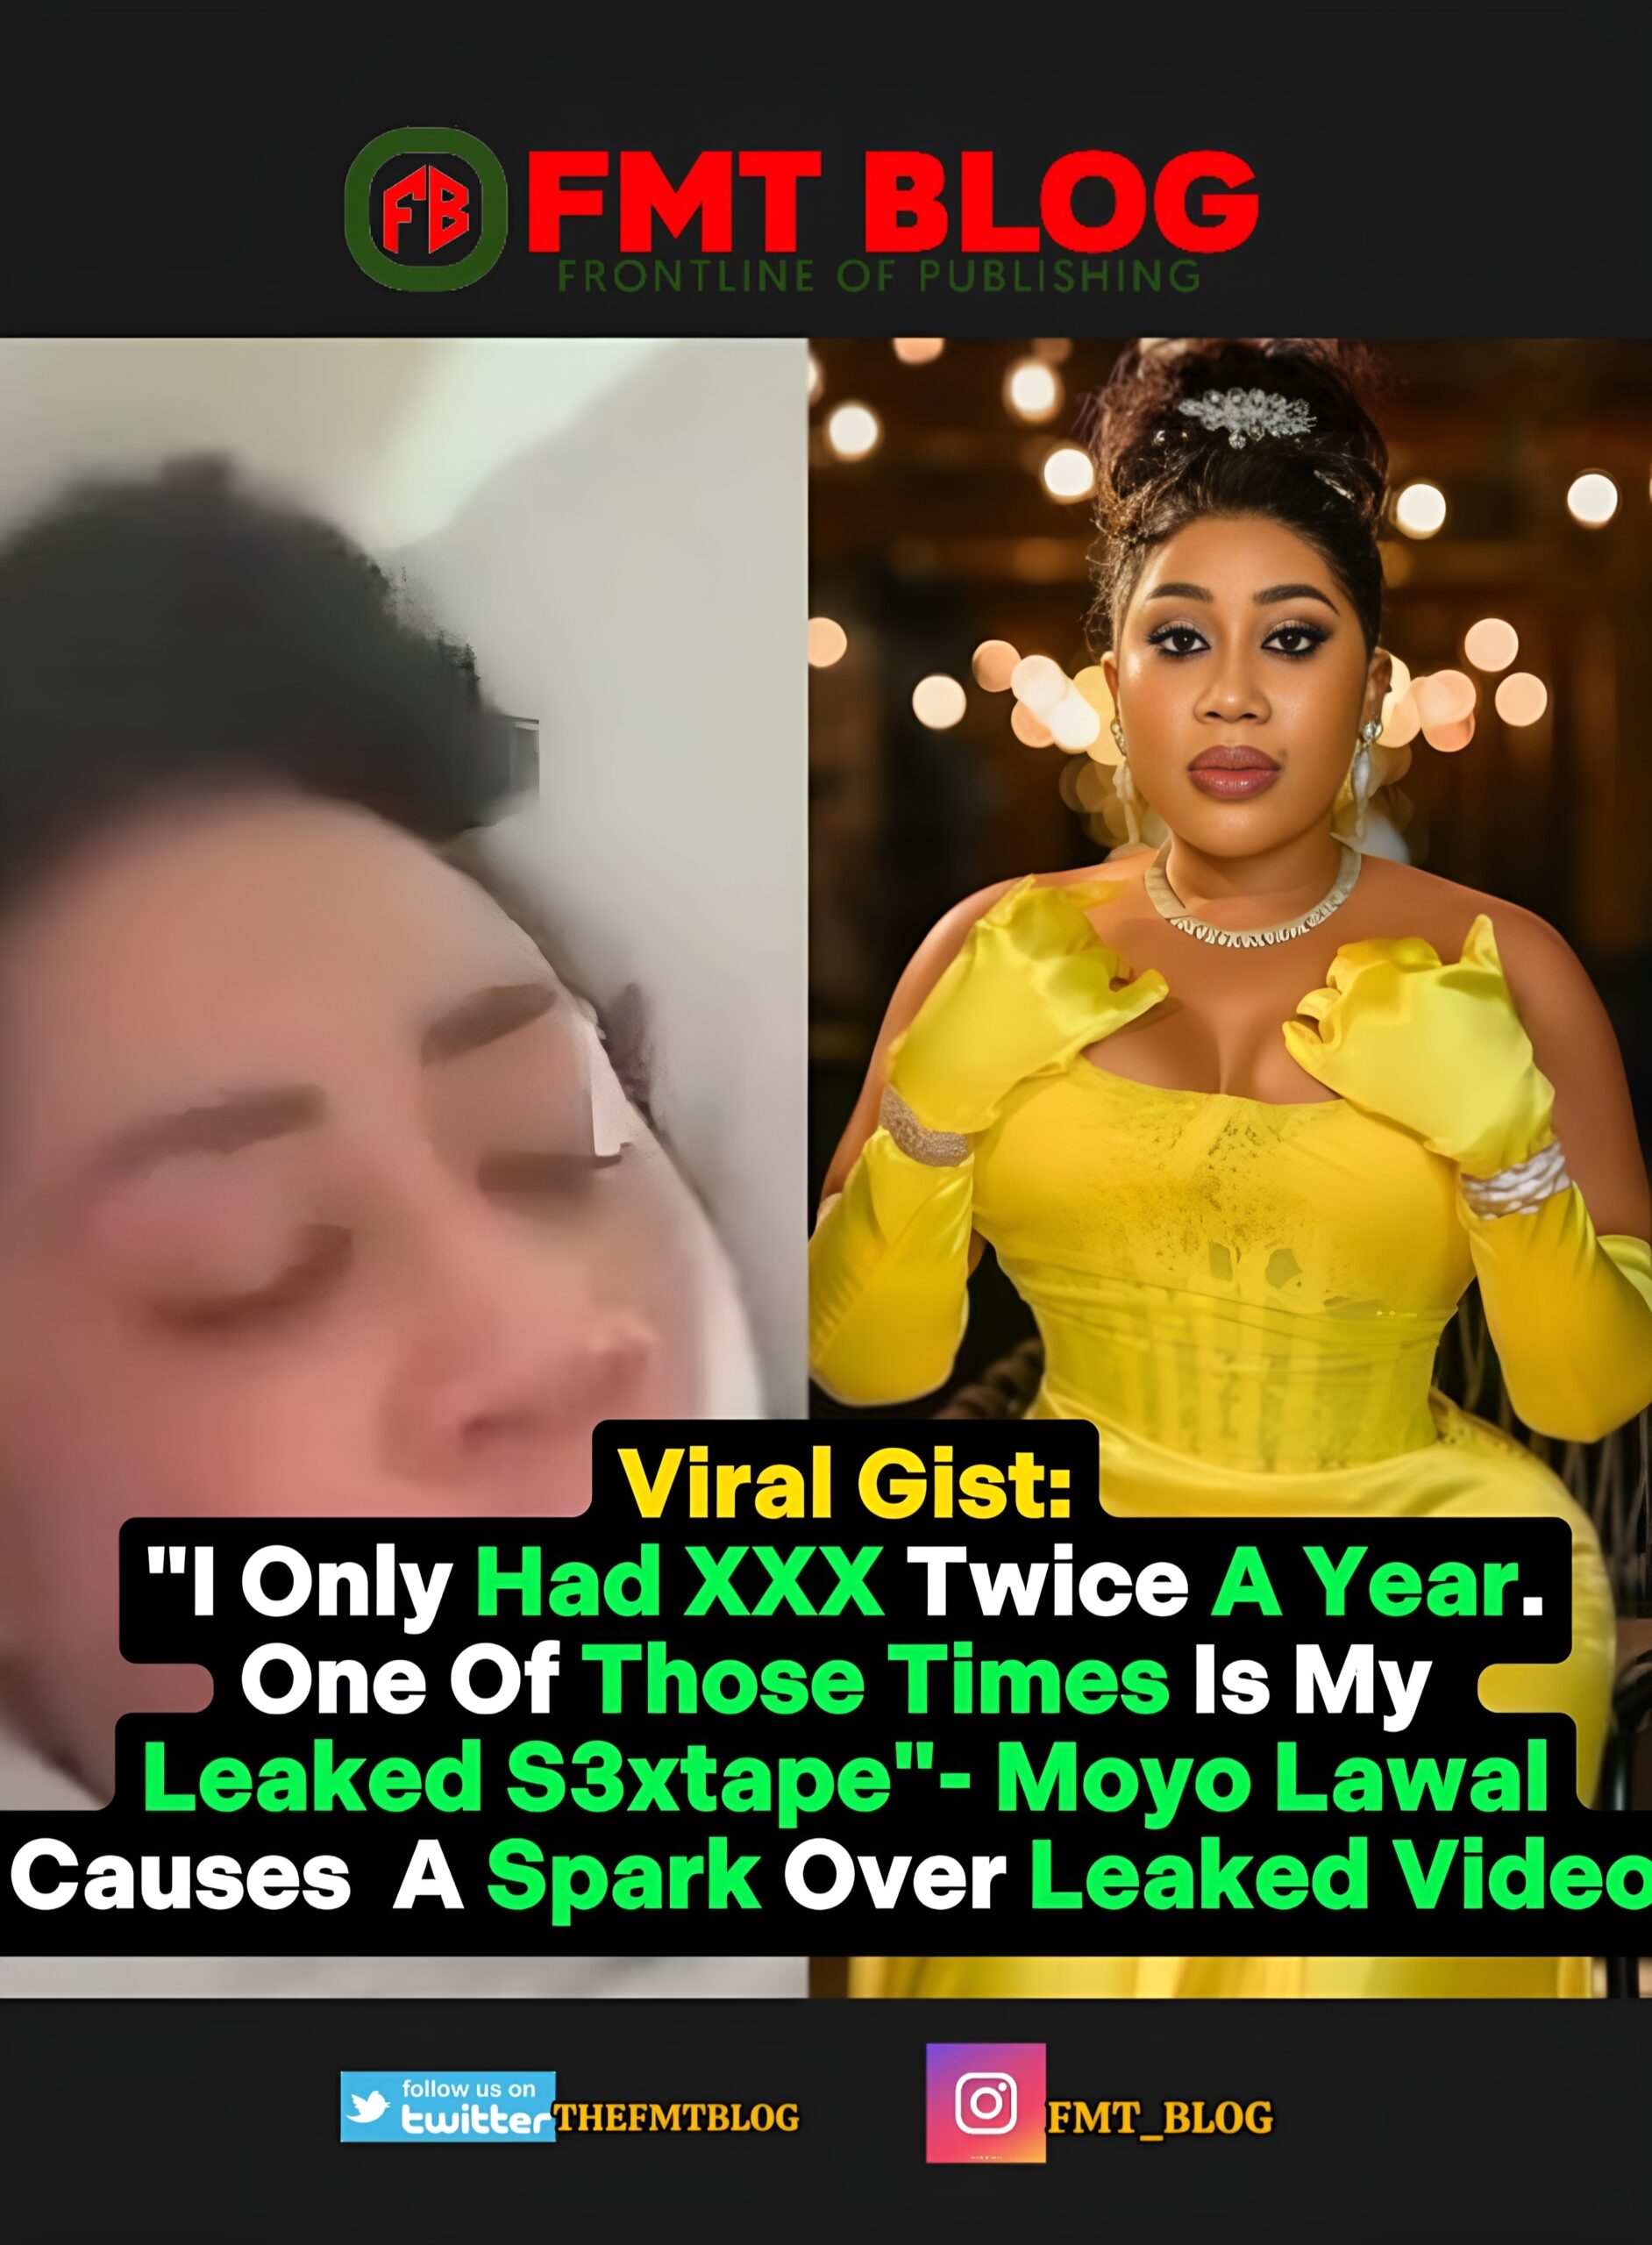 ”I Only Had XXX Twice A Year. One Of Those Times Is My S3xtape Leaked Video”- Moyo Lawal Causes A Spark  Over Leaked Video